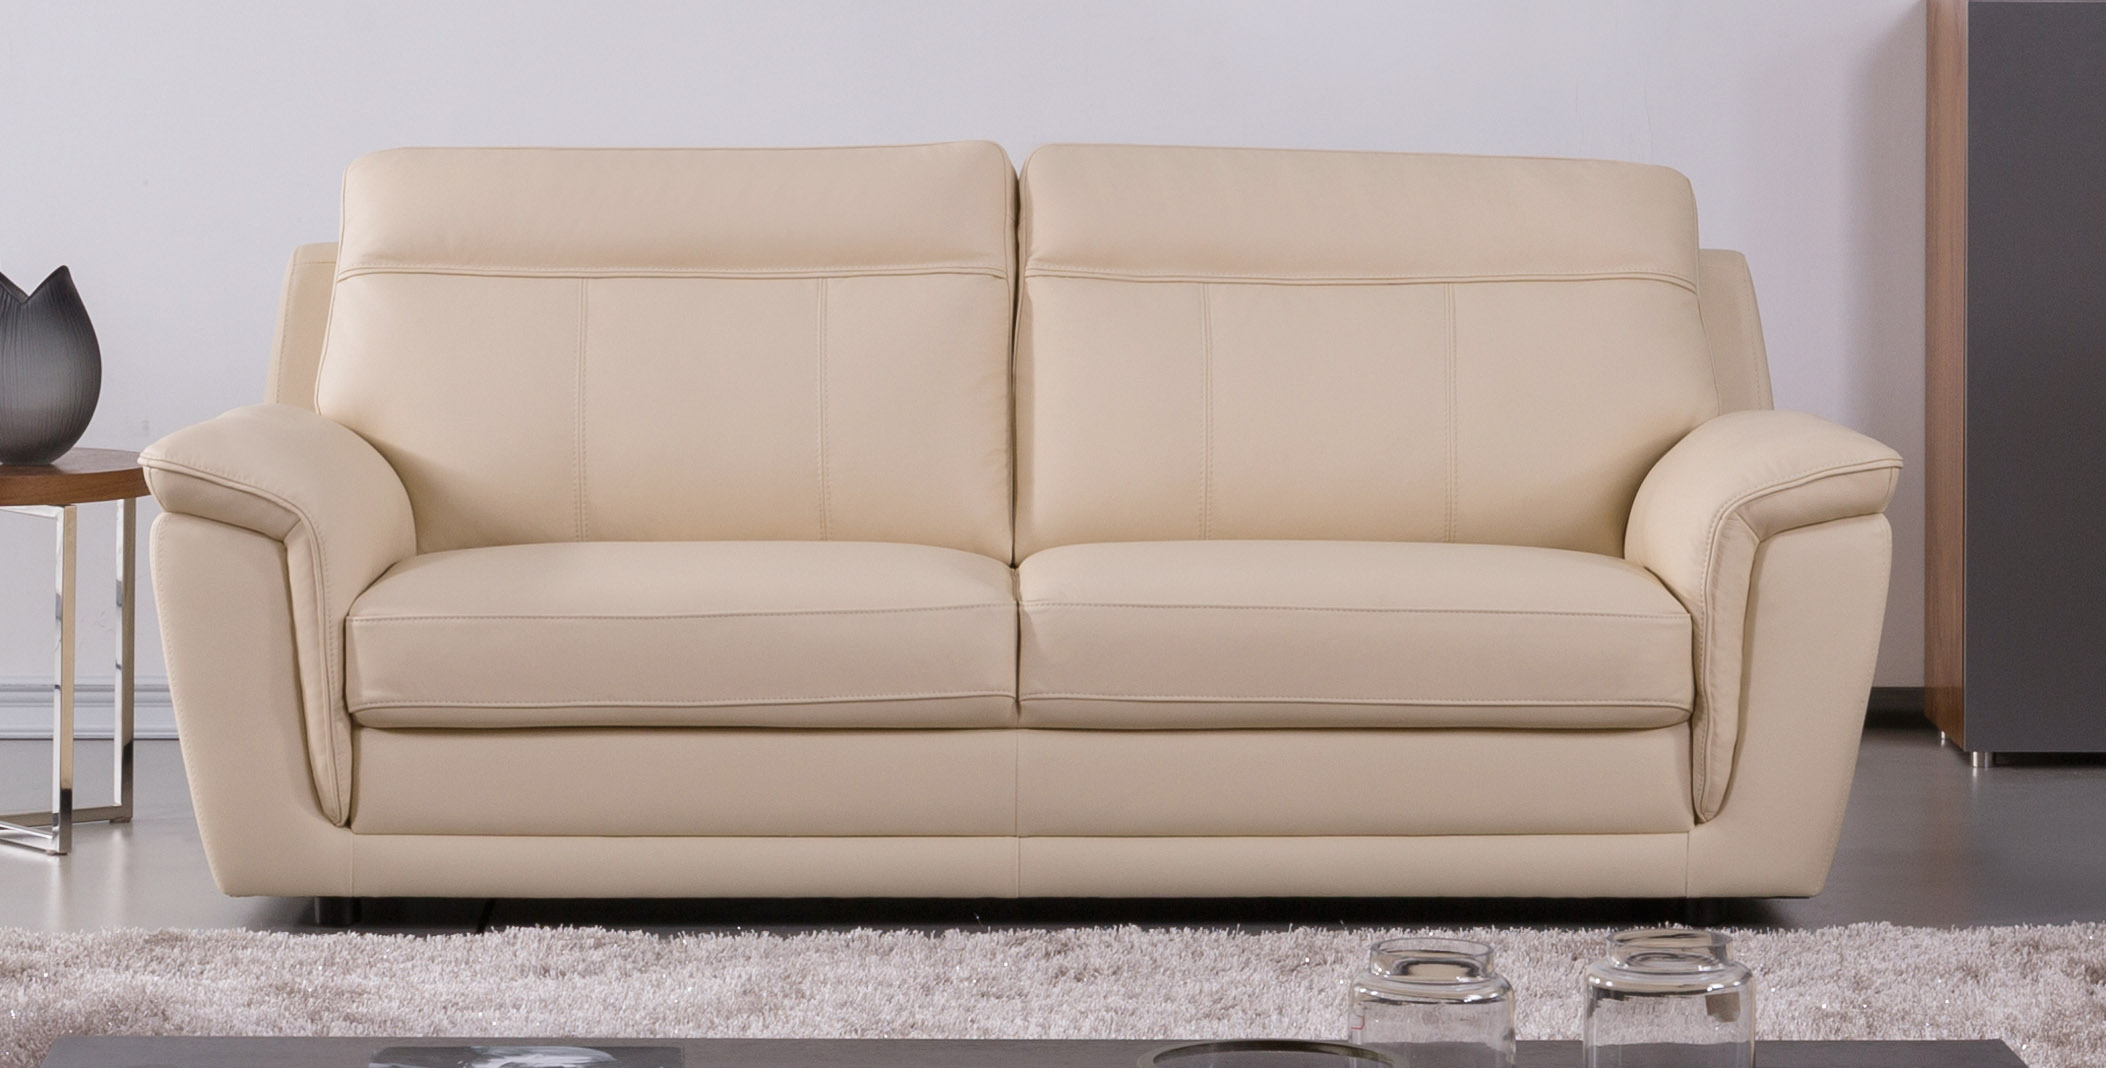 beige leather sofa and loveseat set